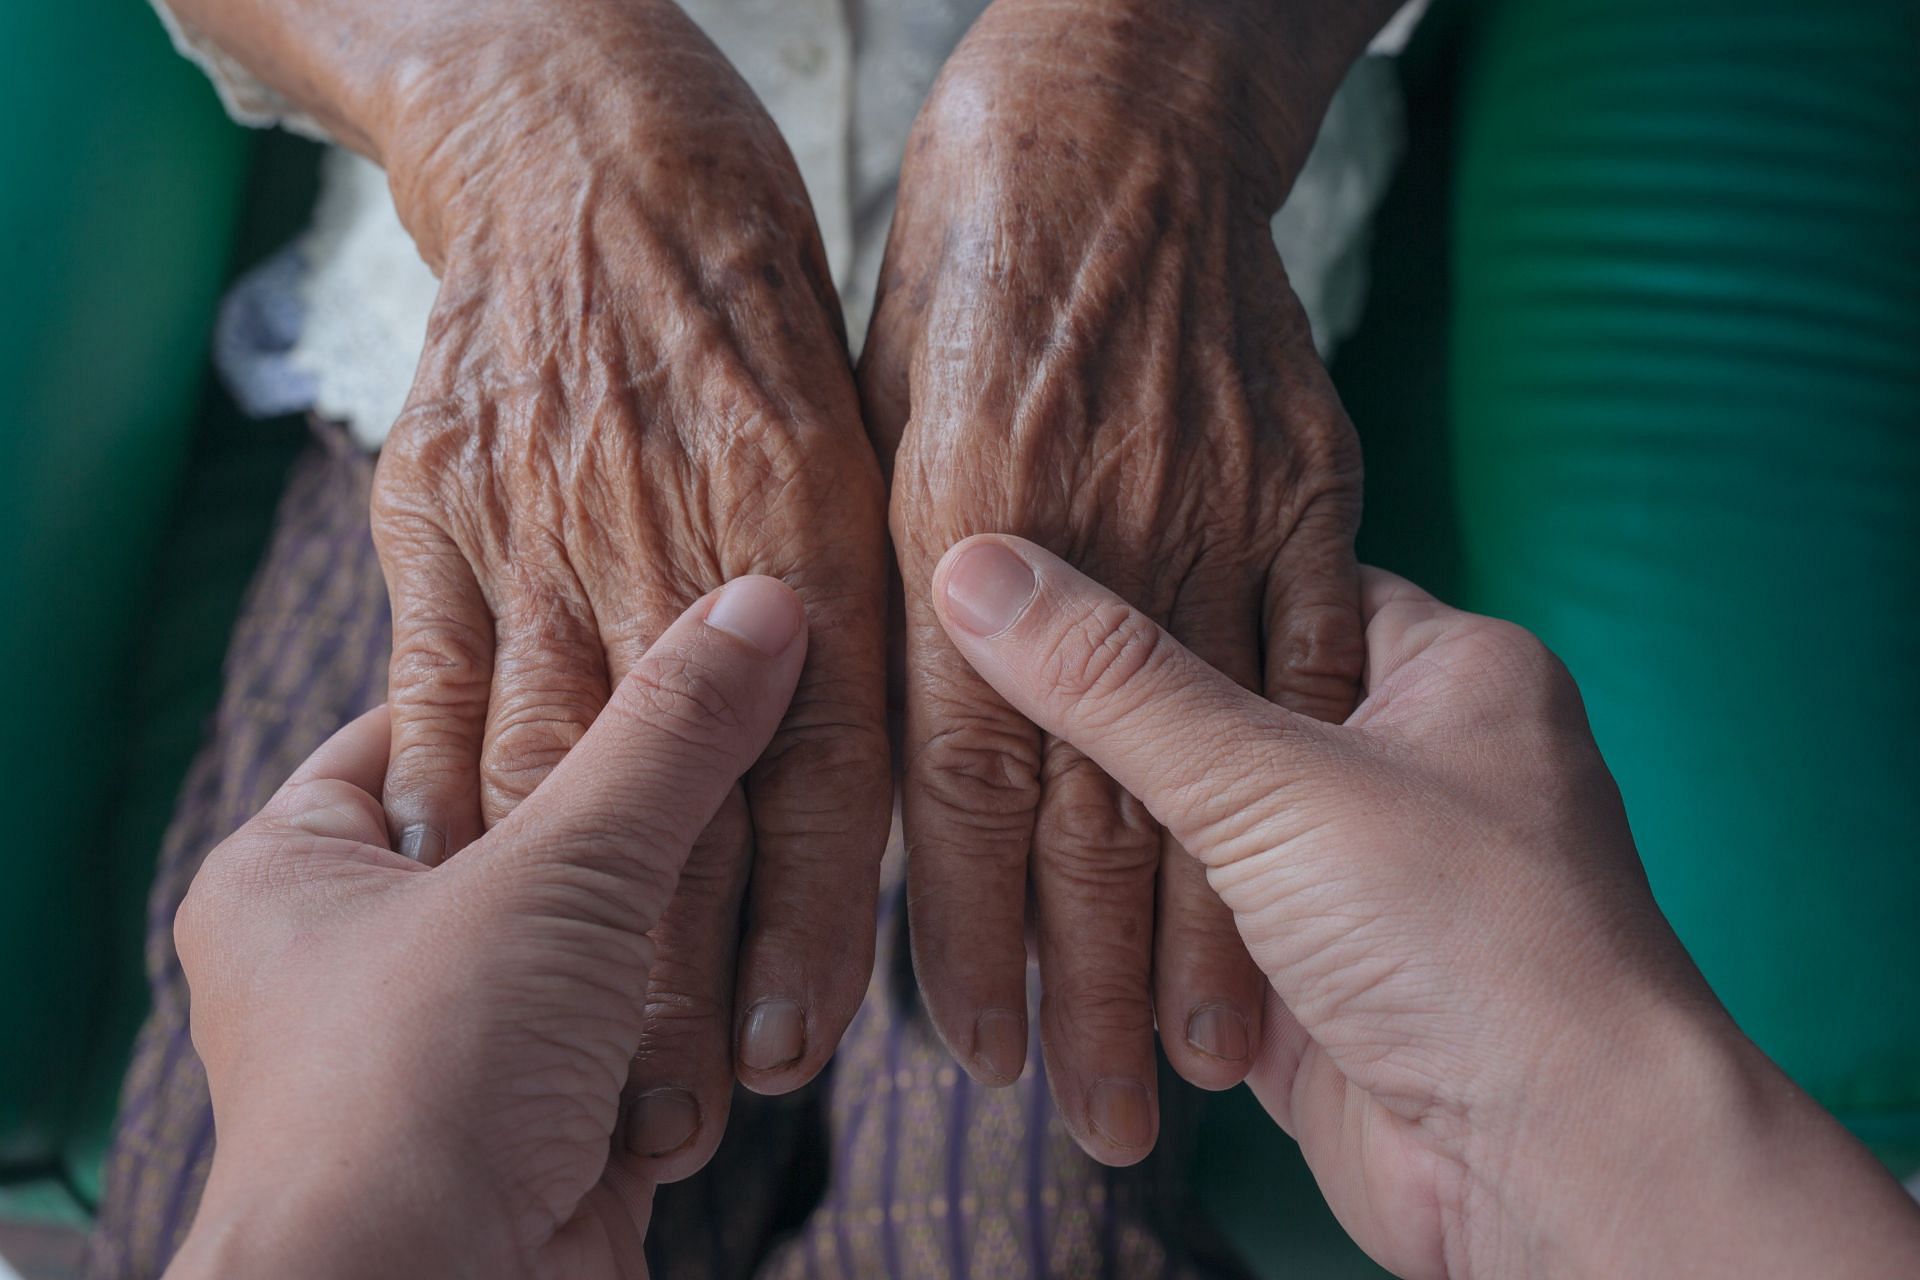 While old age is linked to dementia, it is not the only cause. (Image via Freepik/ Freepik)